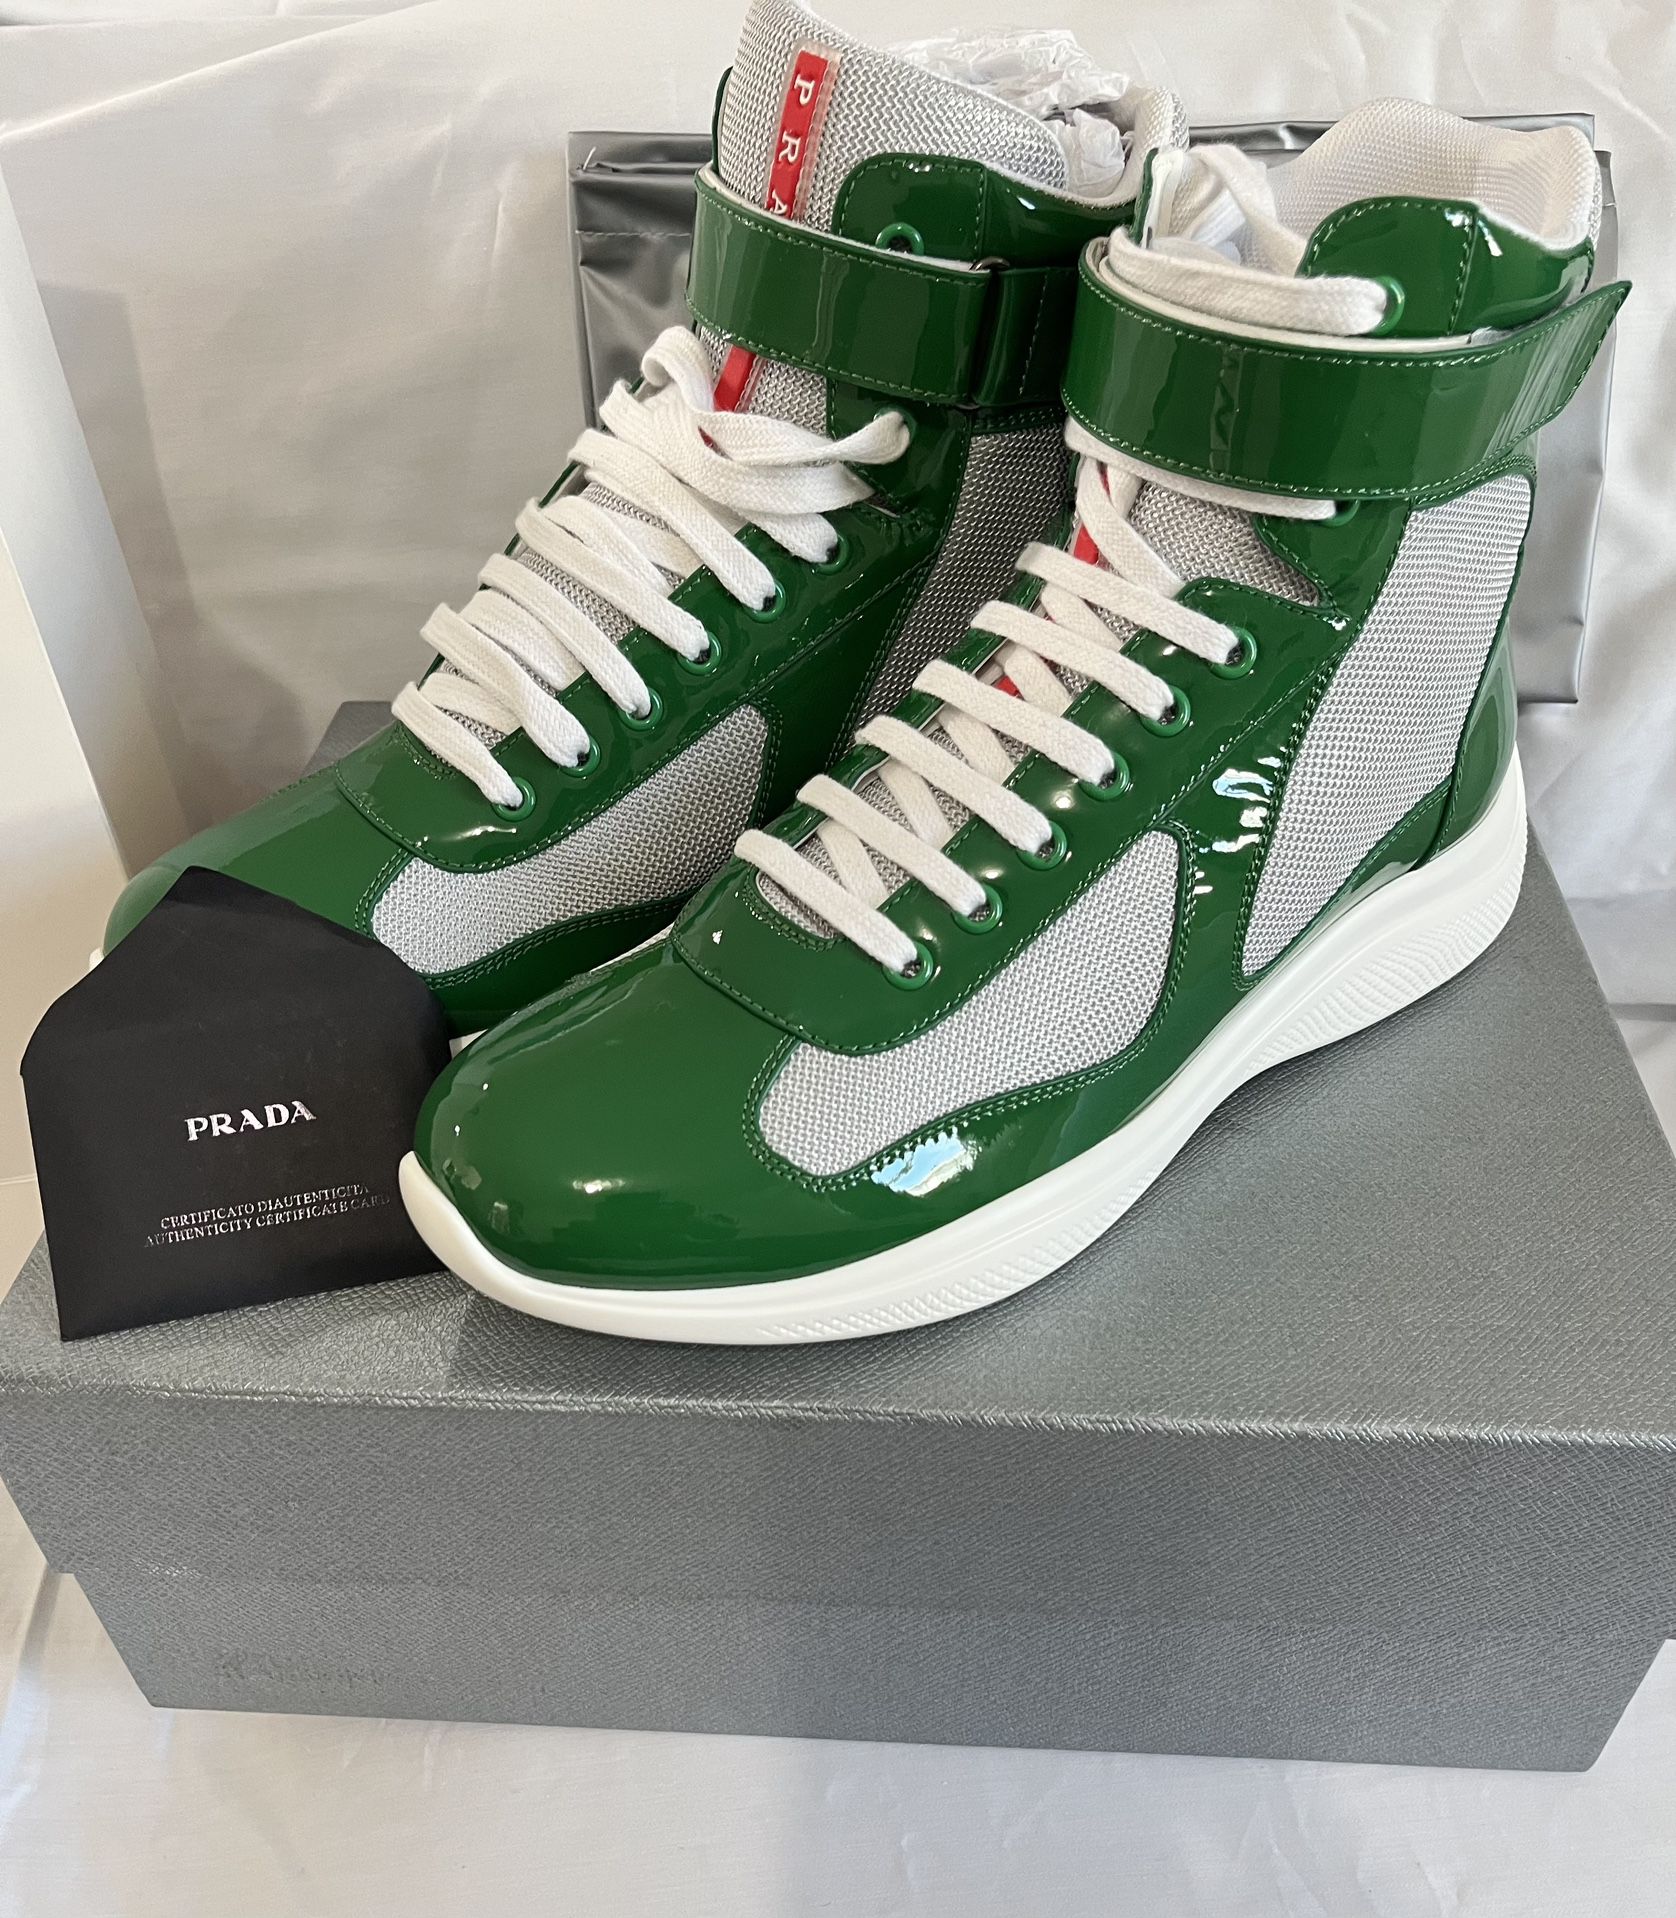 NEW PRADA America's Cup High-Top Patent Leather Green/White Sneakers (Size:  Euro 44, US 10-11) for Sale in Valley Stream, NY - OfferUp